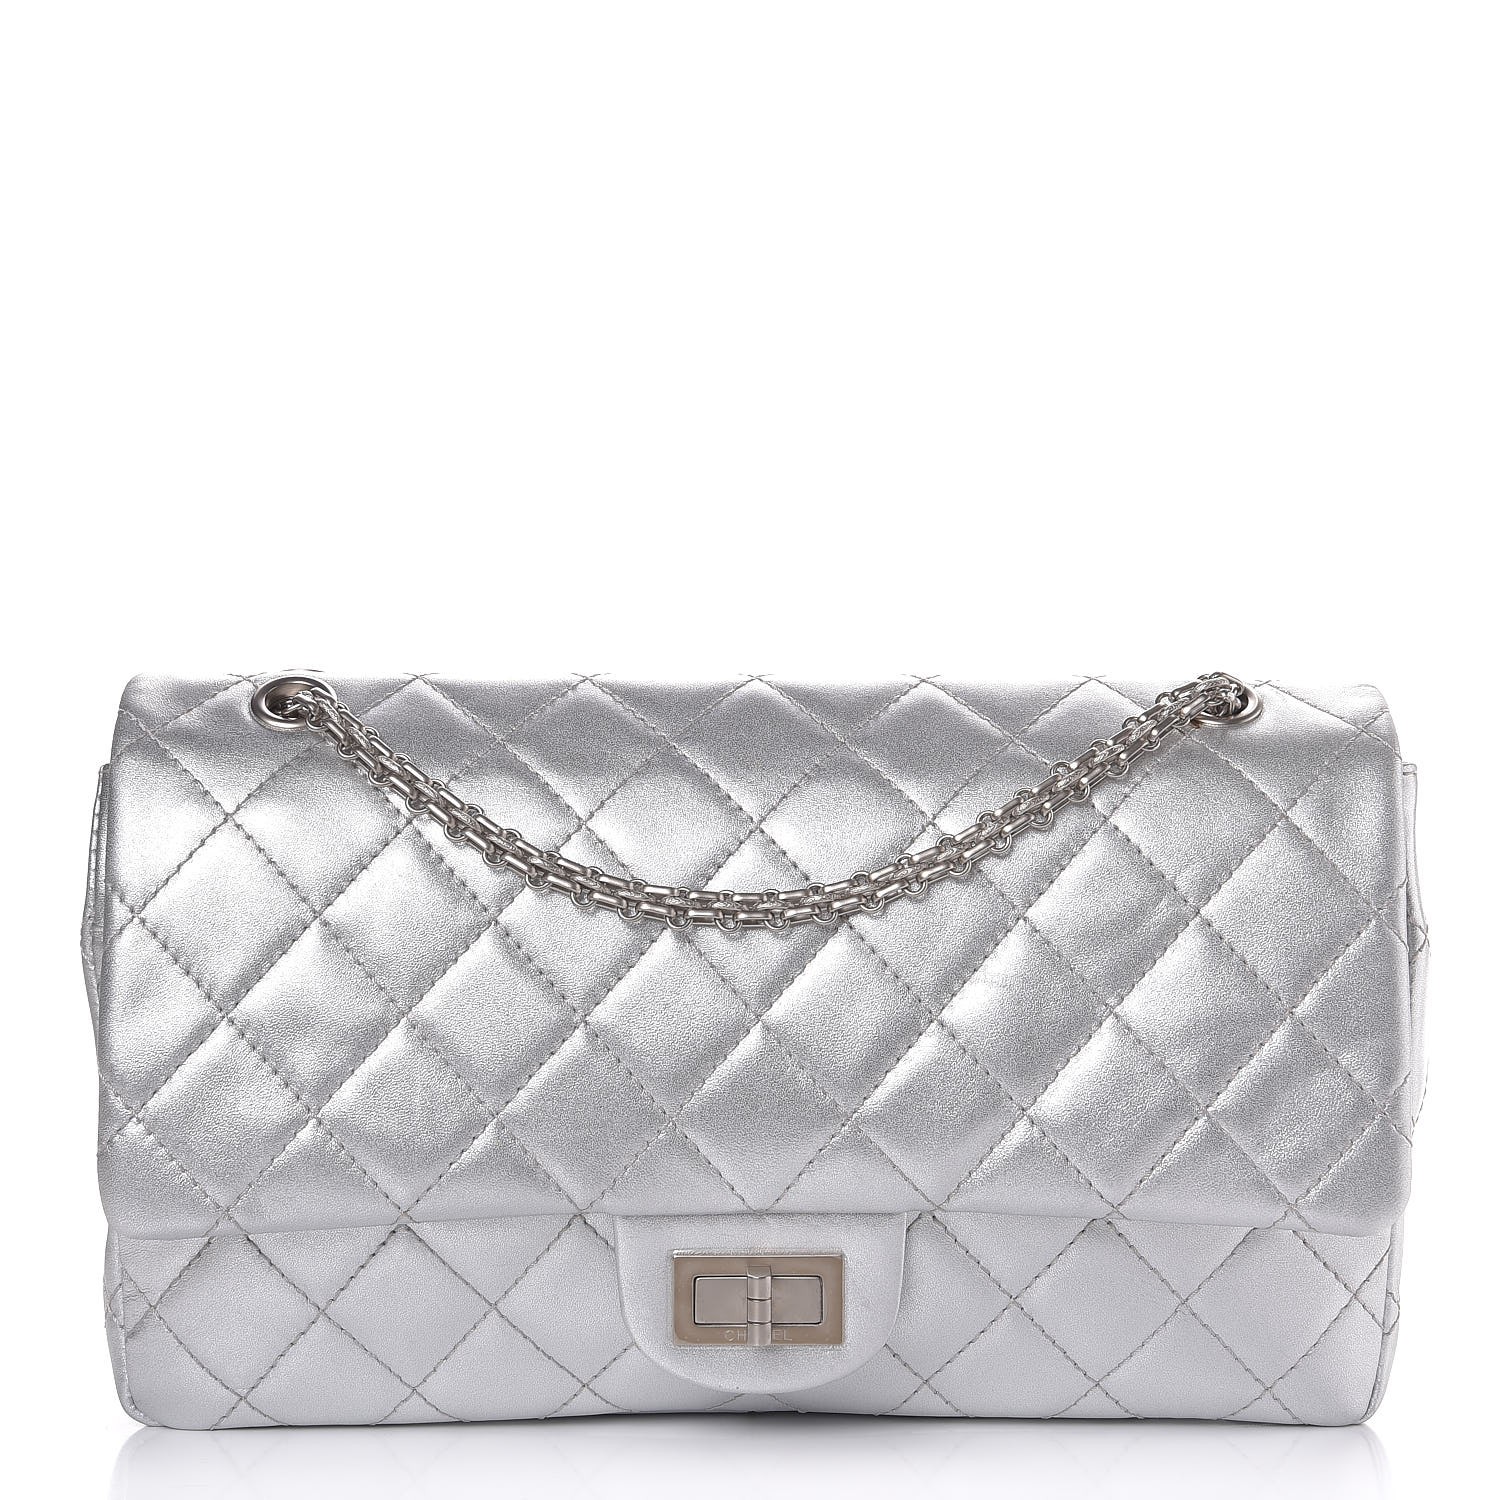 CHANEL Metallic Lambskin Quilted 2.55 Reissue 227 Flap Silver 289676